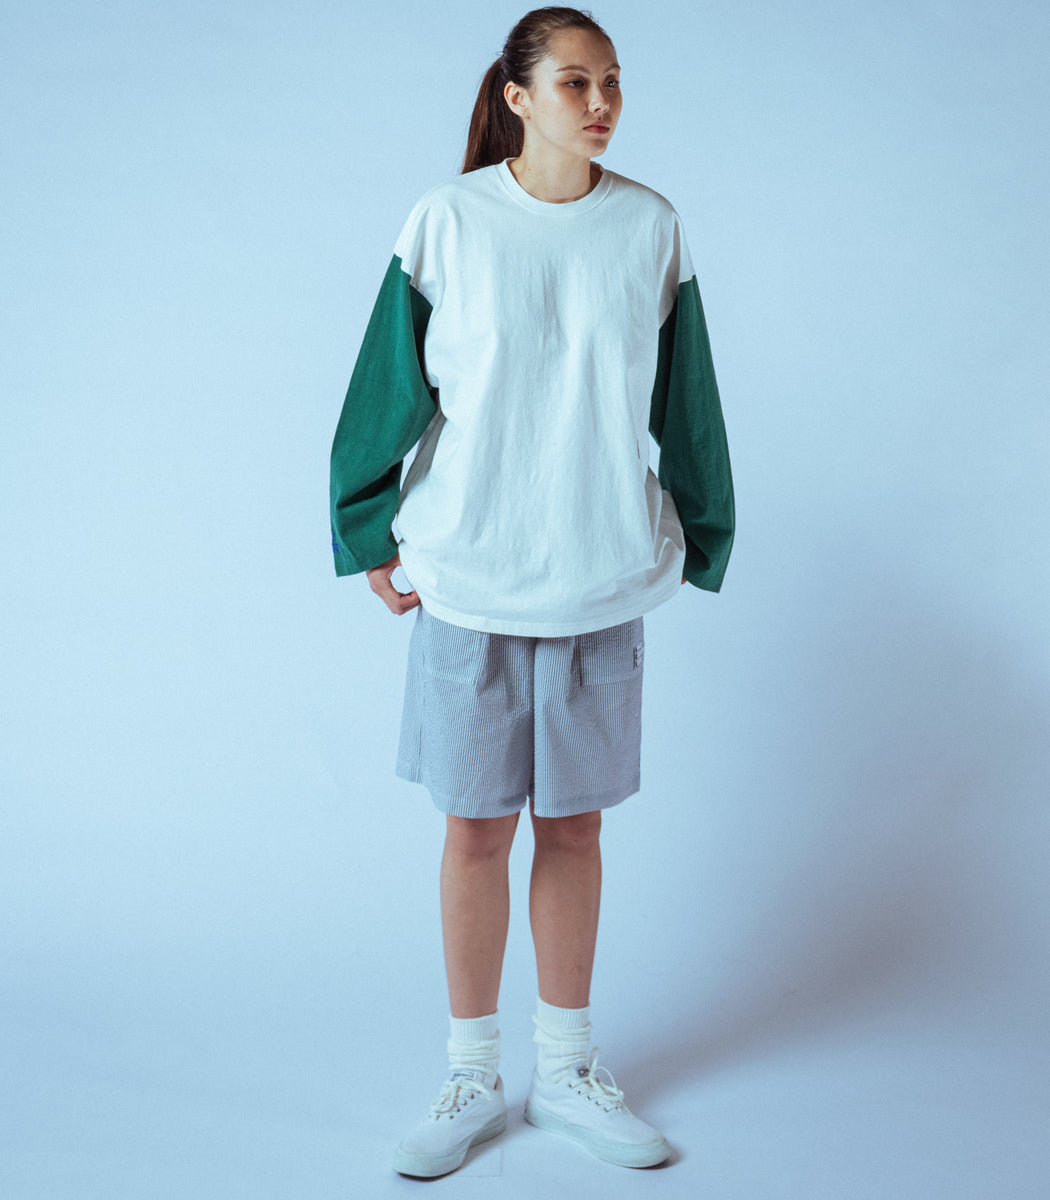 Load image into Gallery viewer, Baseball T-Shirt OFF WHITE×GREEN
